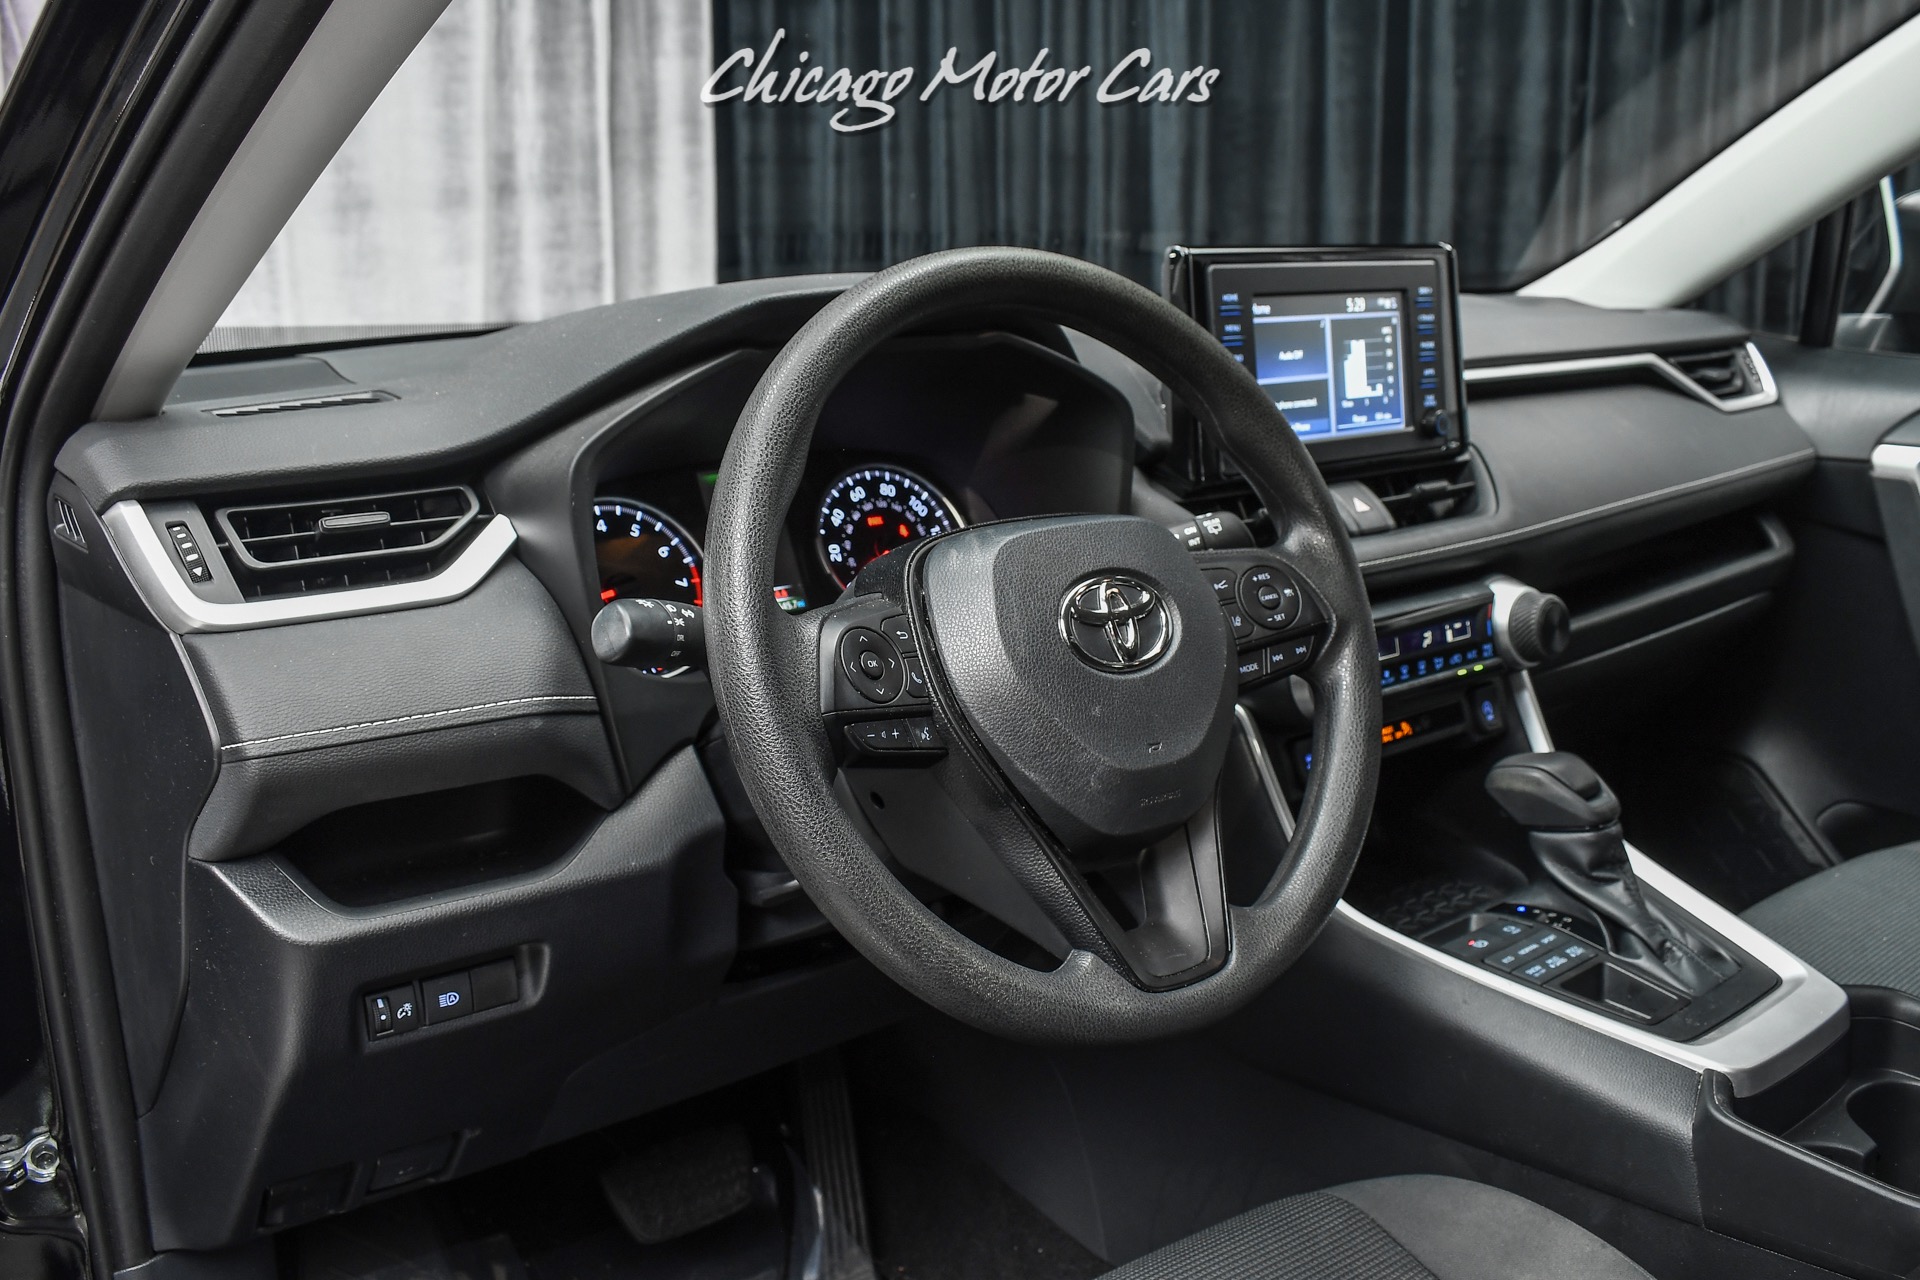 Used-2019-Toyota-RAV4-LE-AWD-SUV-Midnight-Black-All-Weather-Floor-Liners-Well-Equipped-LOW-Miles